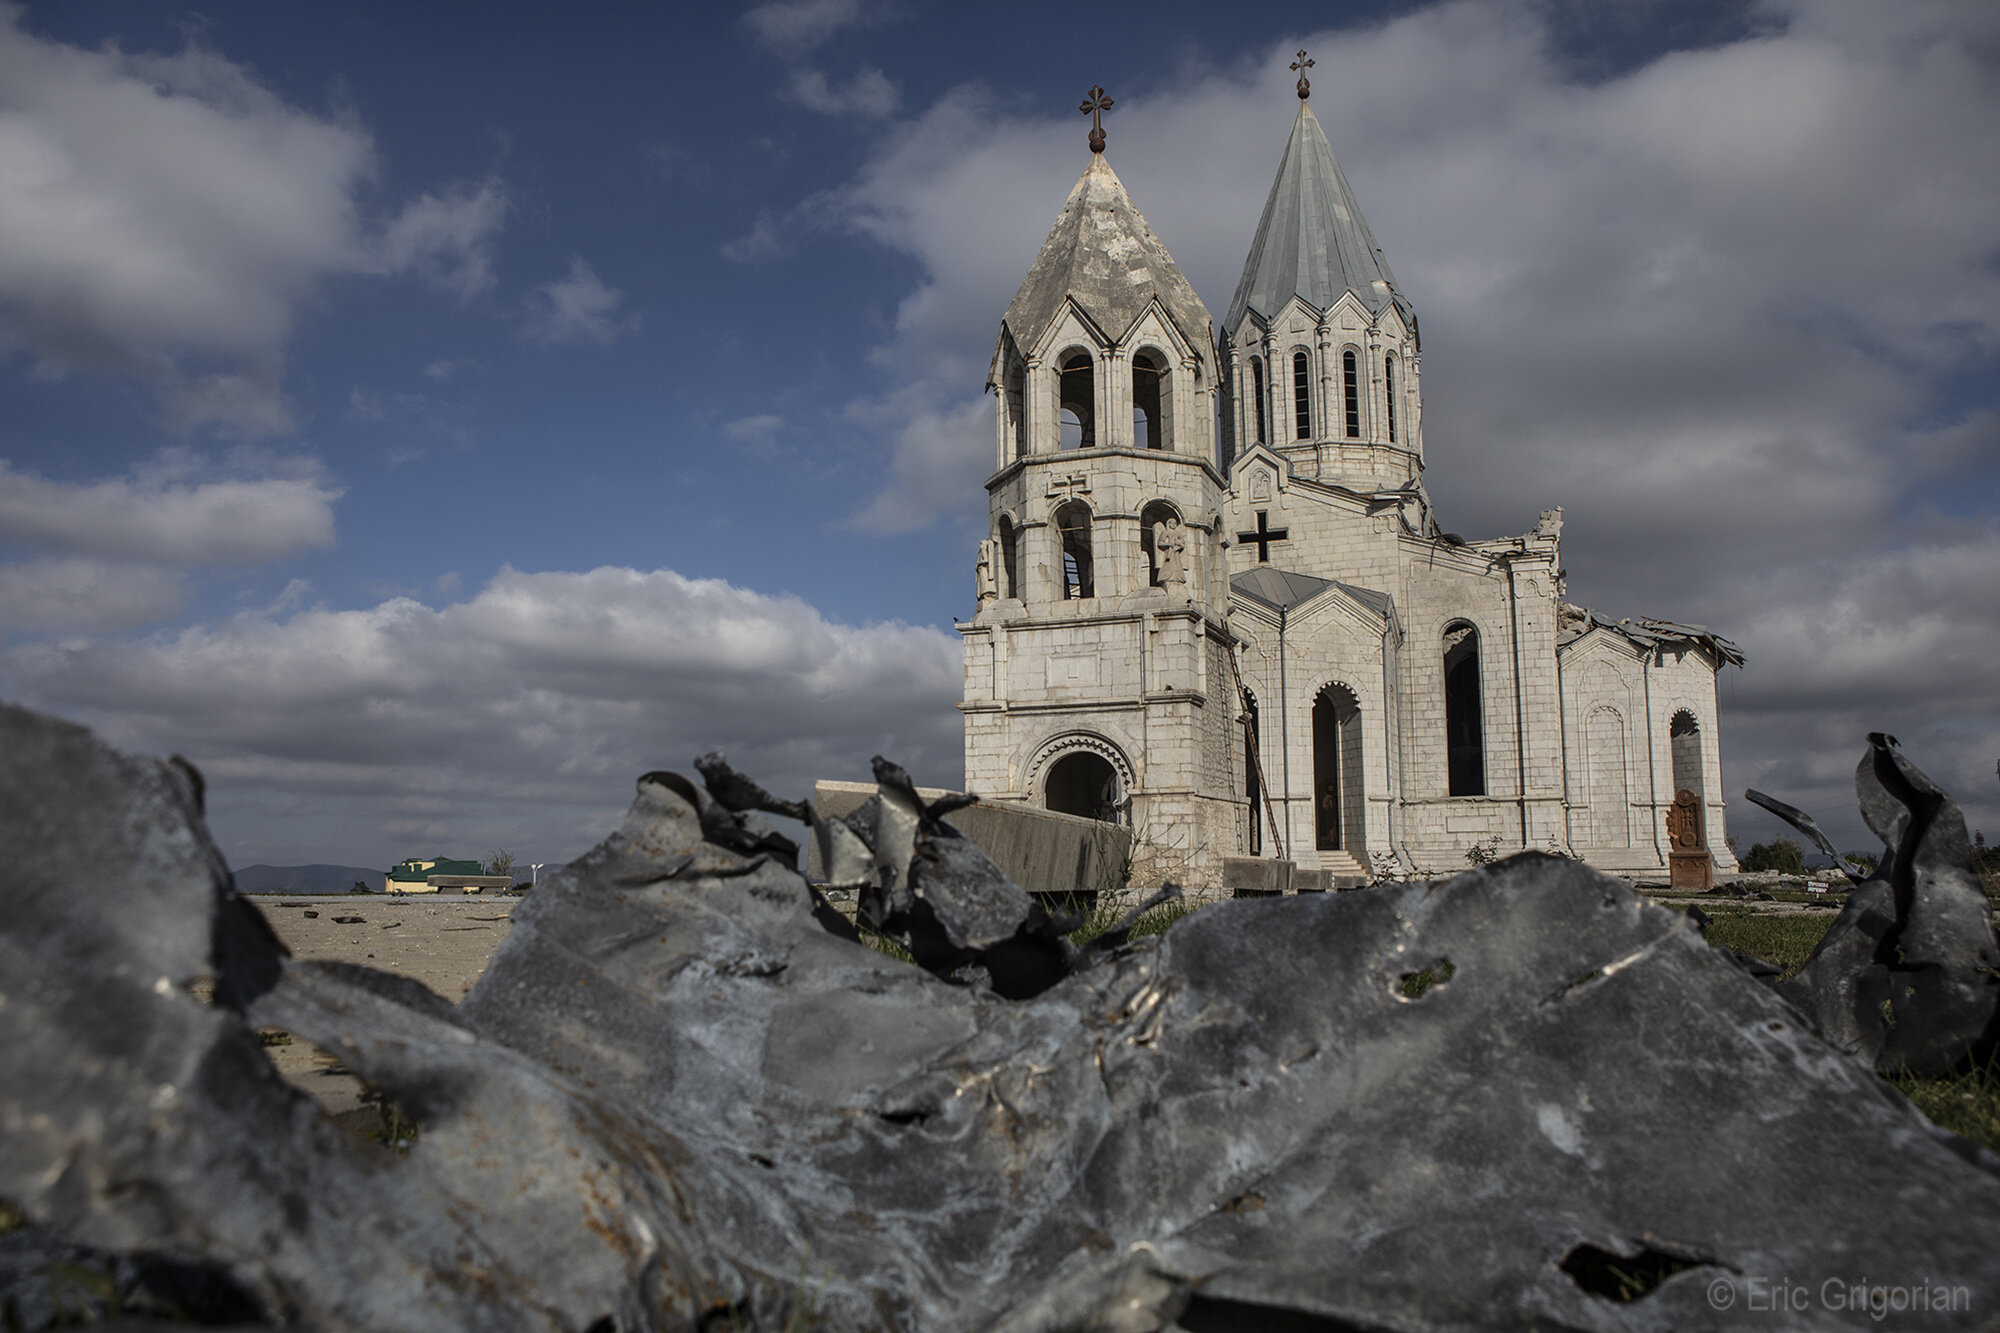  The Holy Savior Ghazanchetsots Cathedral in Shushi was targeted twice on October 8 by Azerbaijani forces, considerably damaging the historic monument and wounding several foreign journalists.  